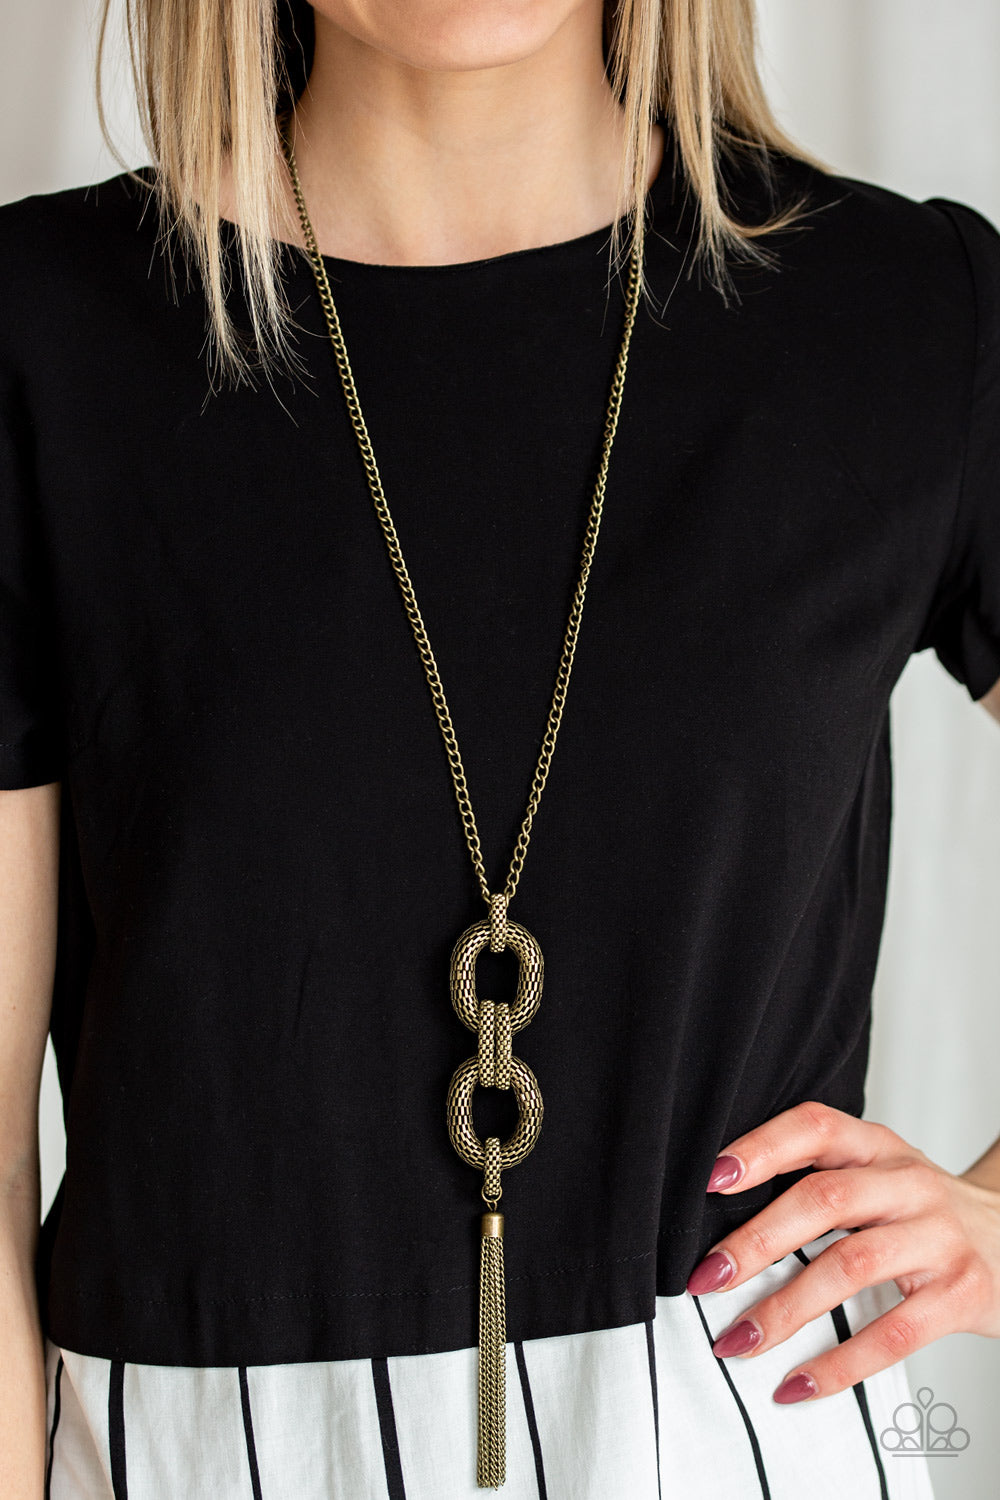 Paparazzi Necklace ~ Enmeshed in Mesh - Brass